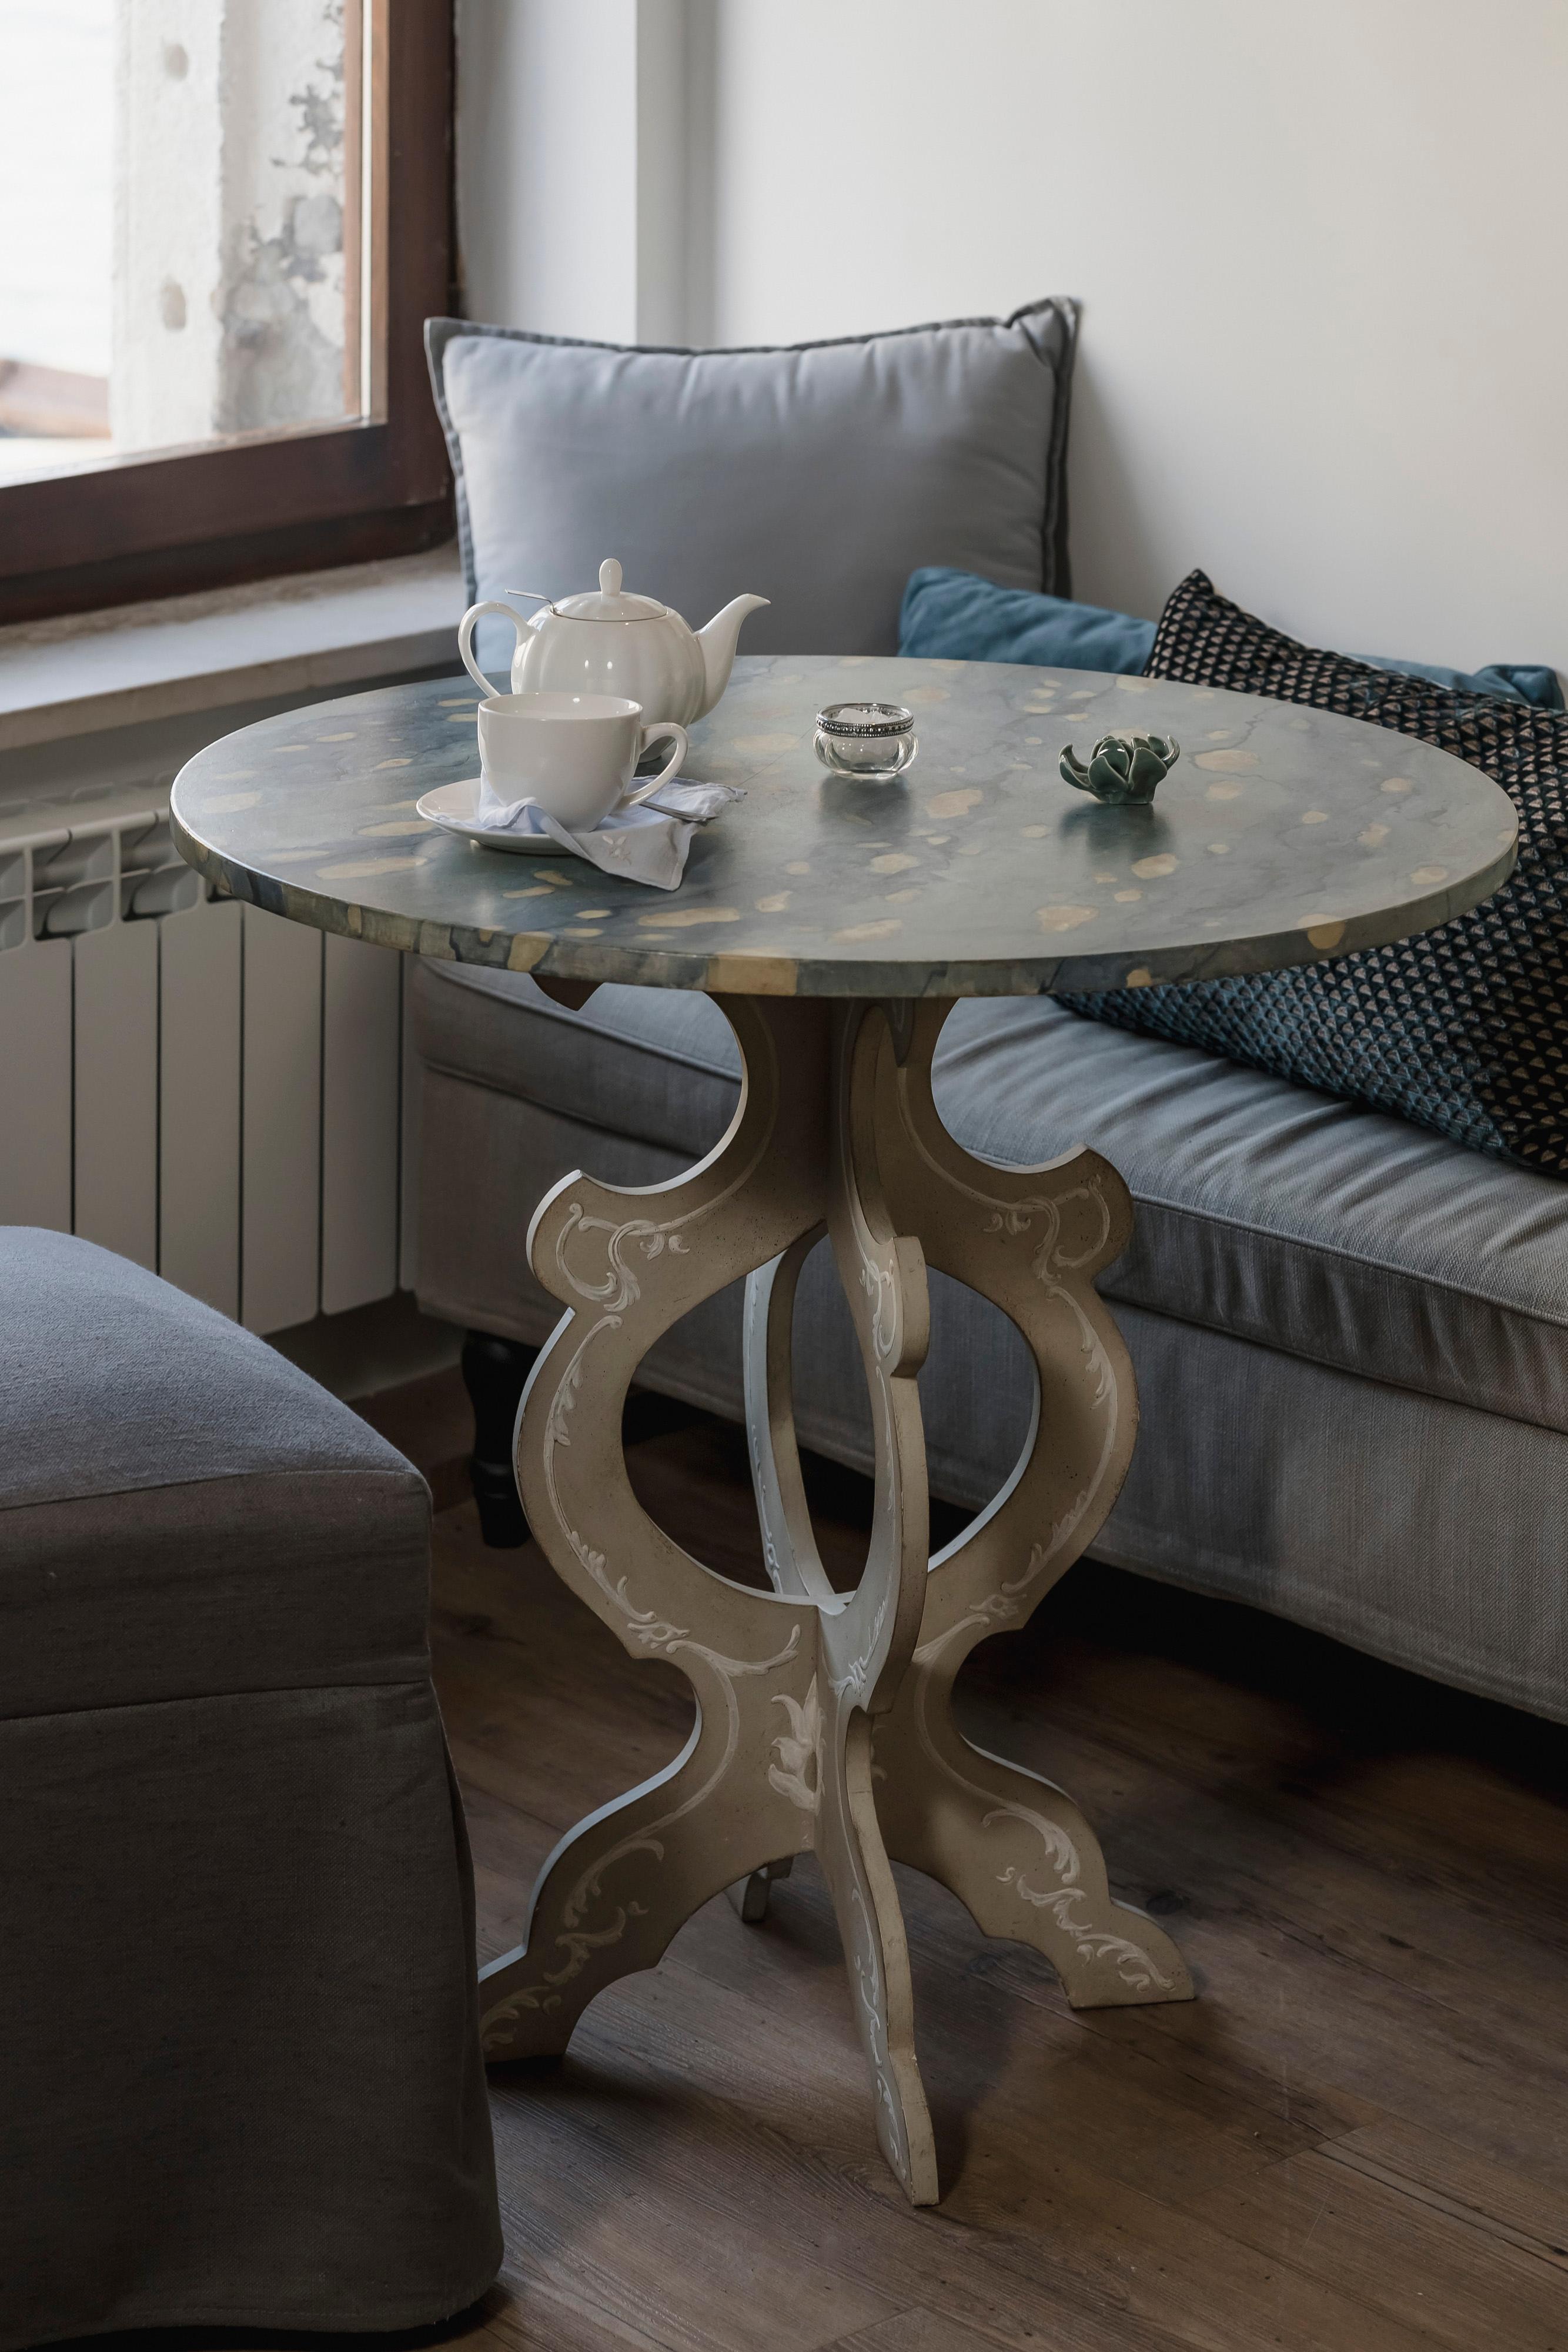 From our Hand-Painted Furniture Collection, we are pleased to introduce you to our Santa Maria del Giglio Coffee Table with a marble effect wooden top and scalloped legs with raised-gesso decorations.
Simply the perfect coffee table, made in